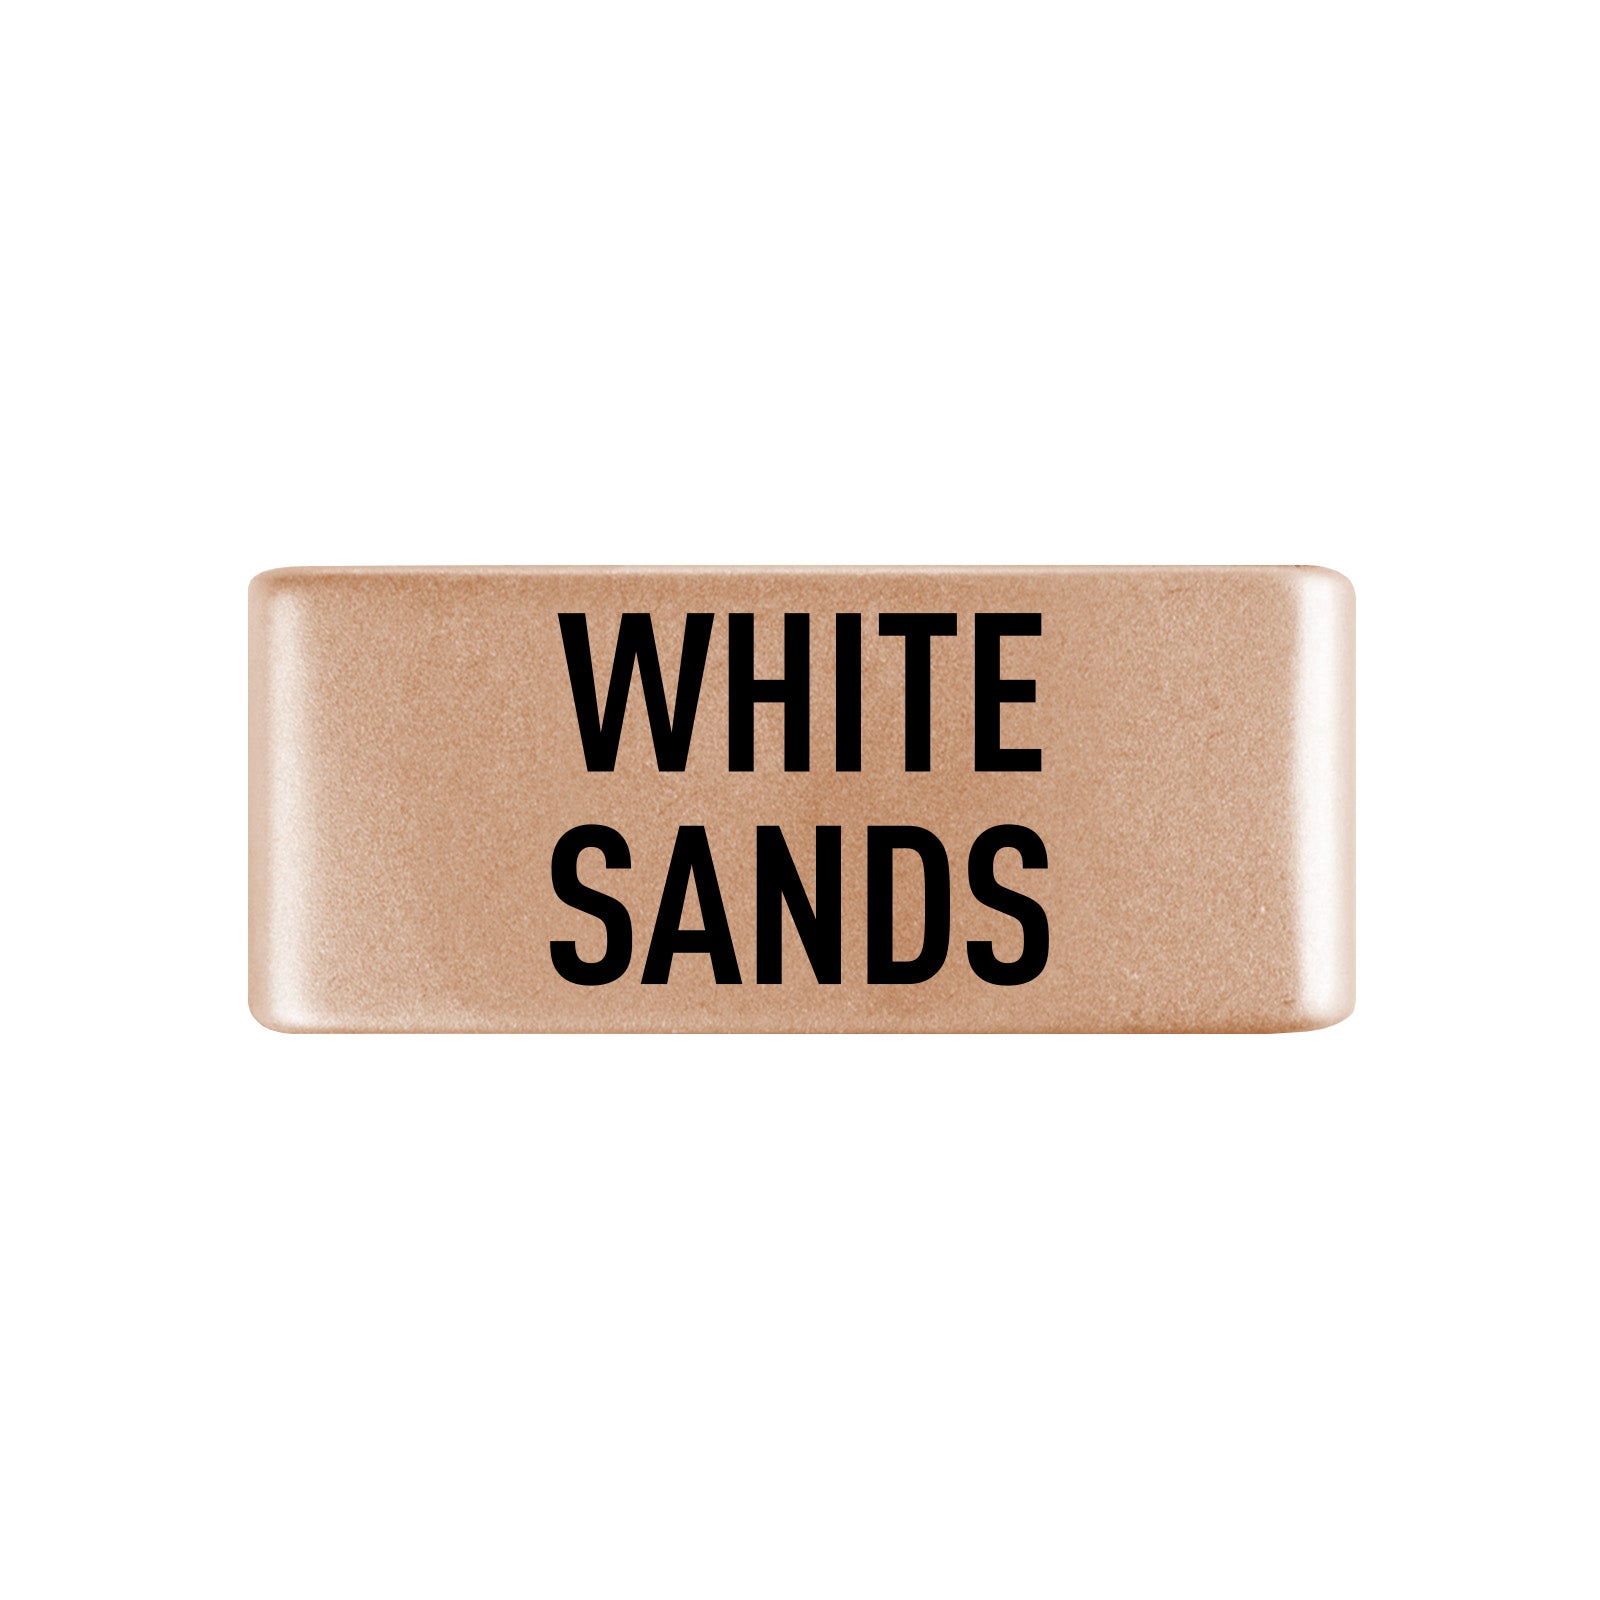 White Sands Badge Badge 13mm - ROAD iD